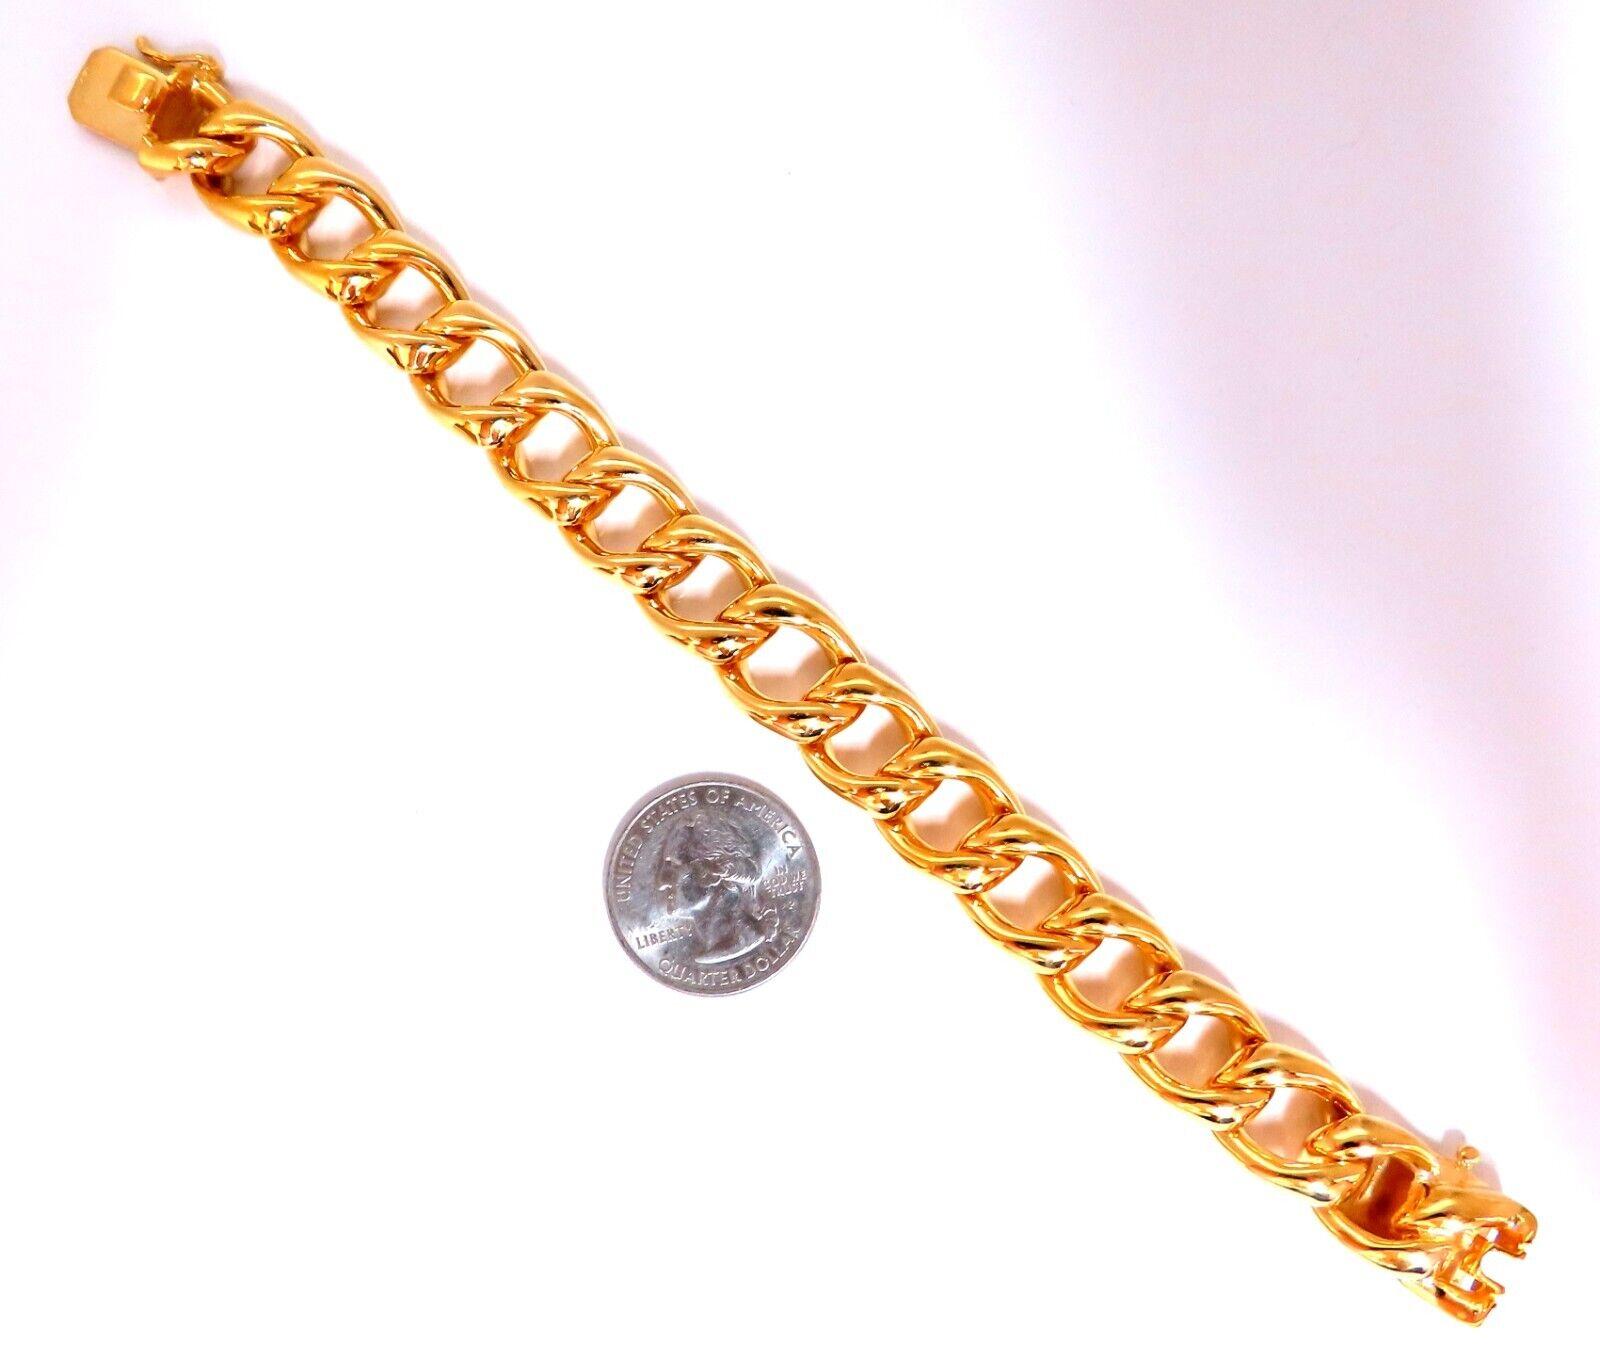 Cuban Link Bracelet

Durable, Well Made

14kt. yellow gold

63 Grams.

15 mm wide

7.75 inch long

Snap Clasp Closure